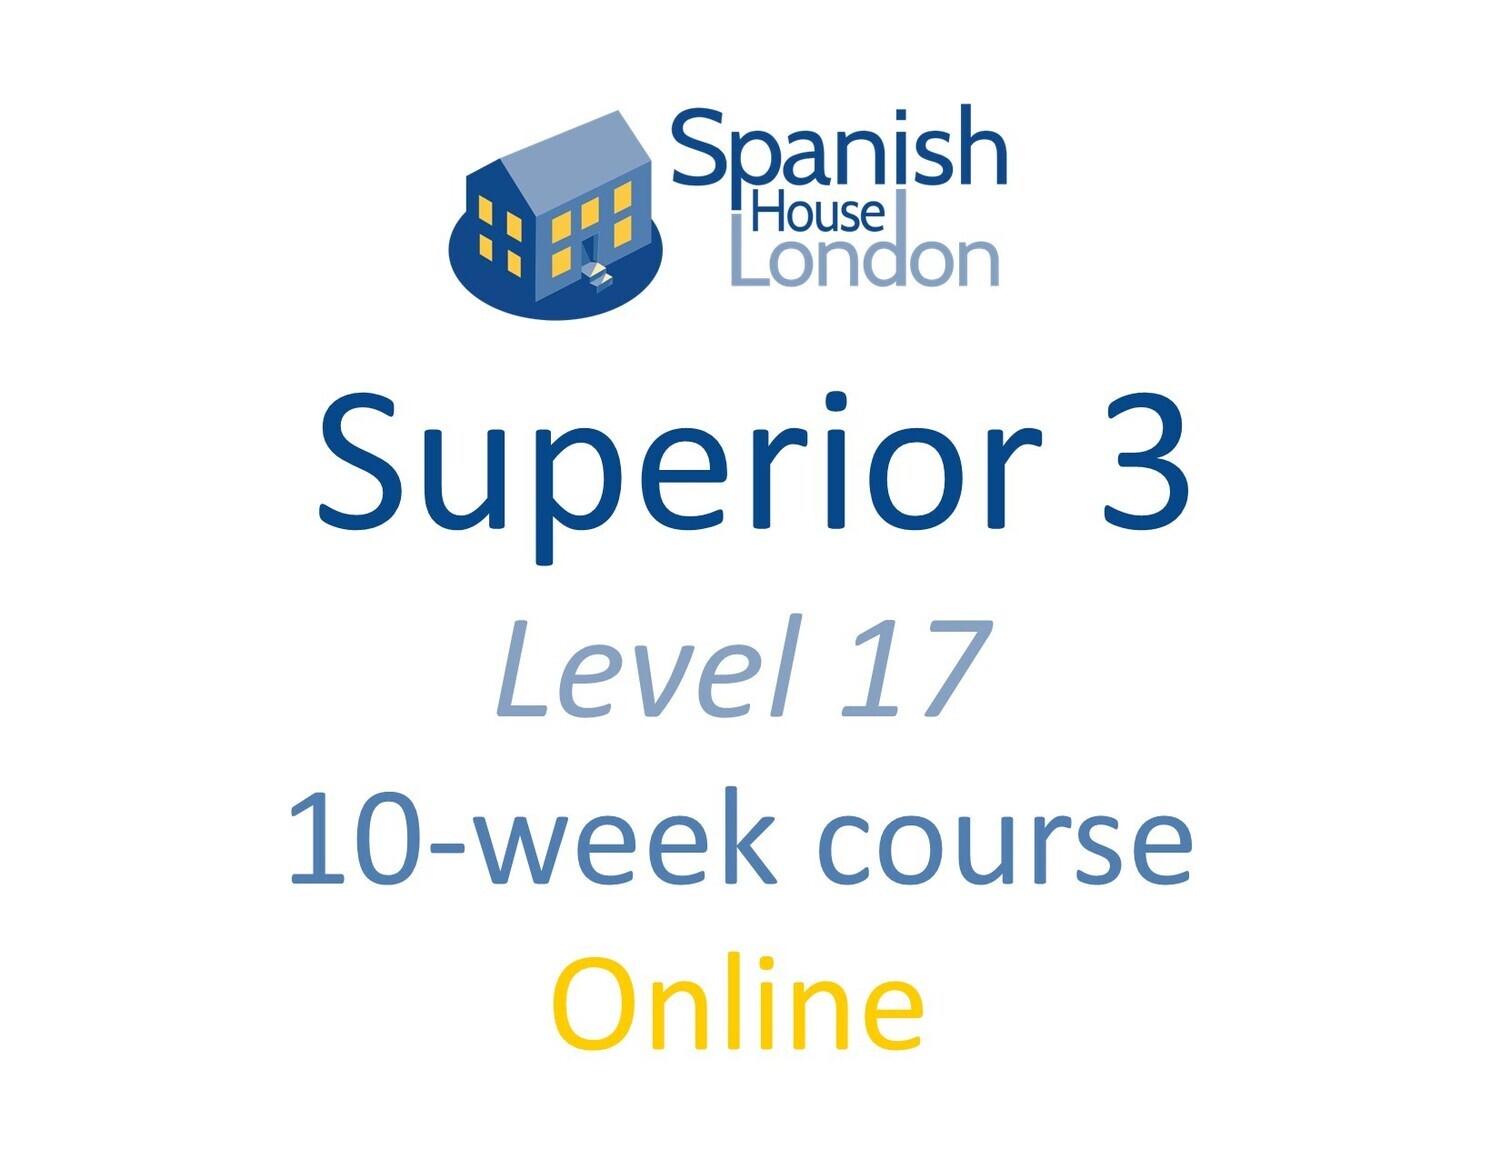 Superior 3 Course starting on 13th March at 7.30pm Online